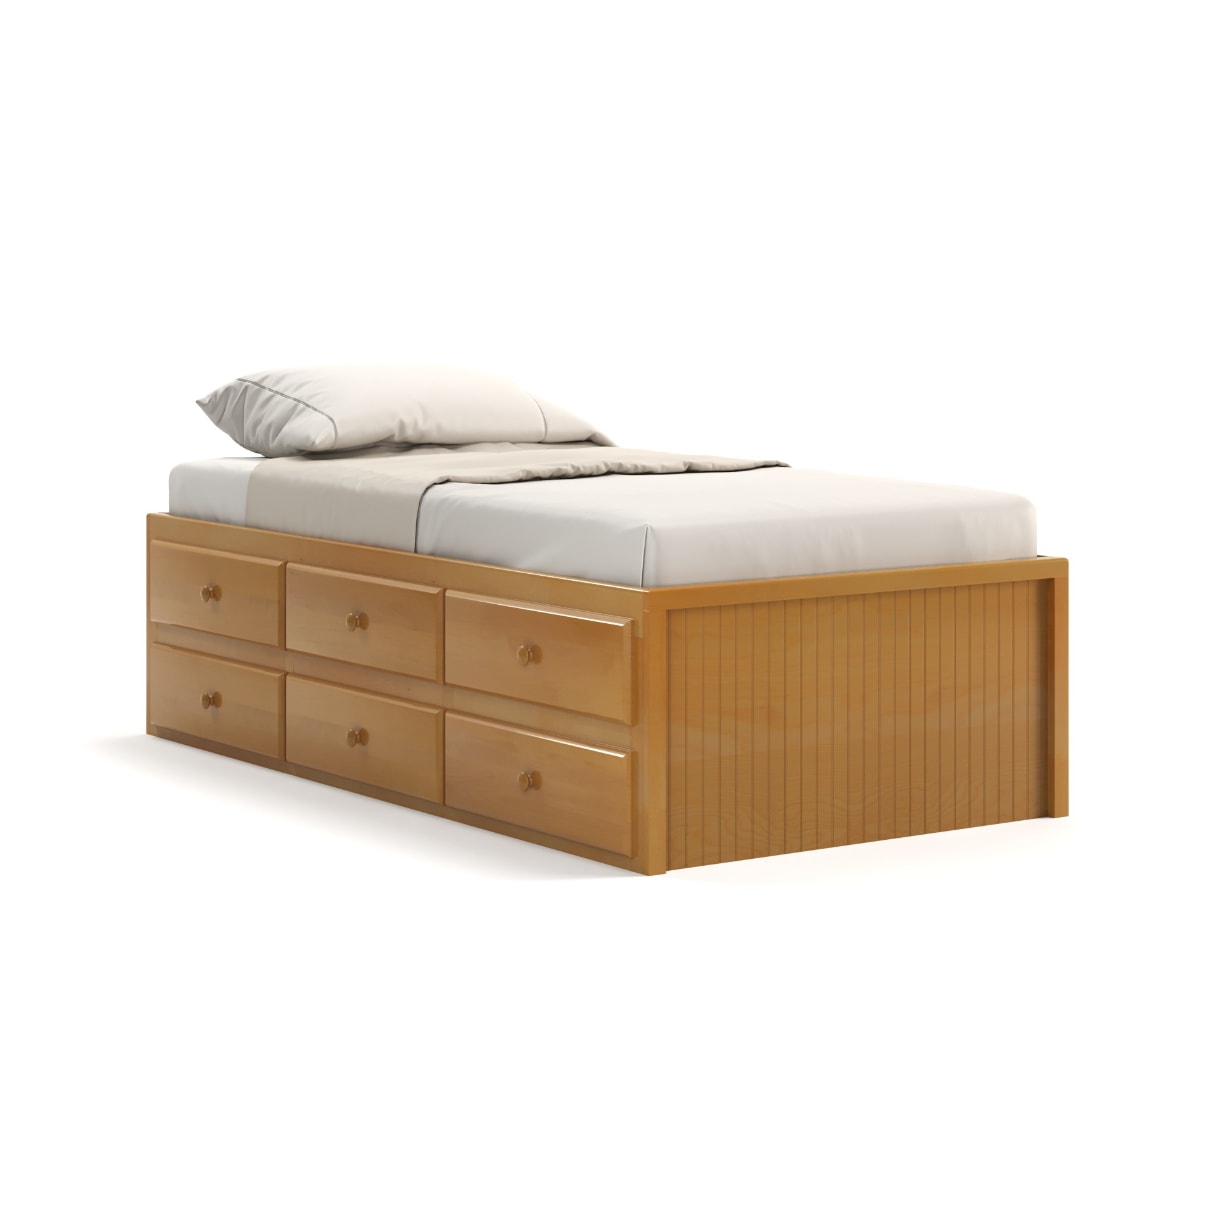 Acadia Cottage Storage Bed with 6 drawers one one side, pictured in autumn finish with bead board end.